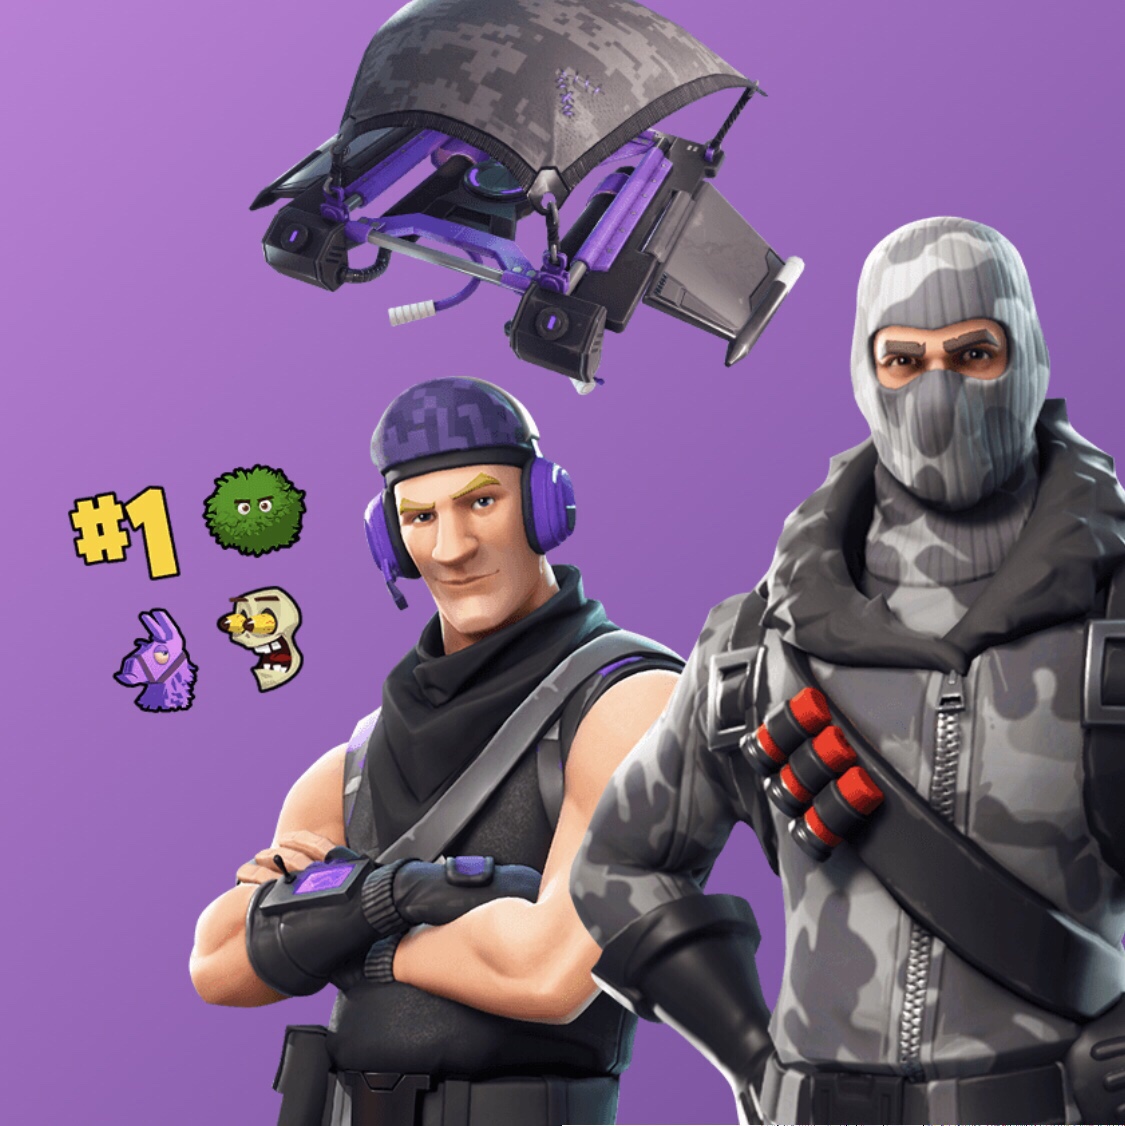 Fortnite exclusive twitch prime Loot - XBox One Games - Gameflip.